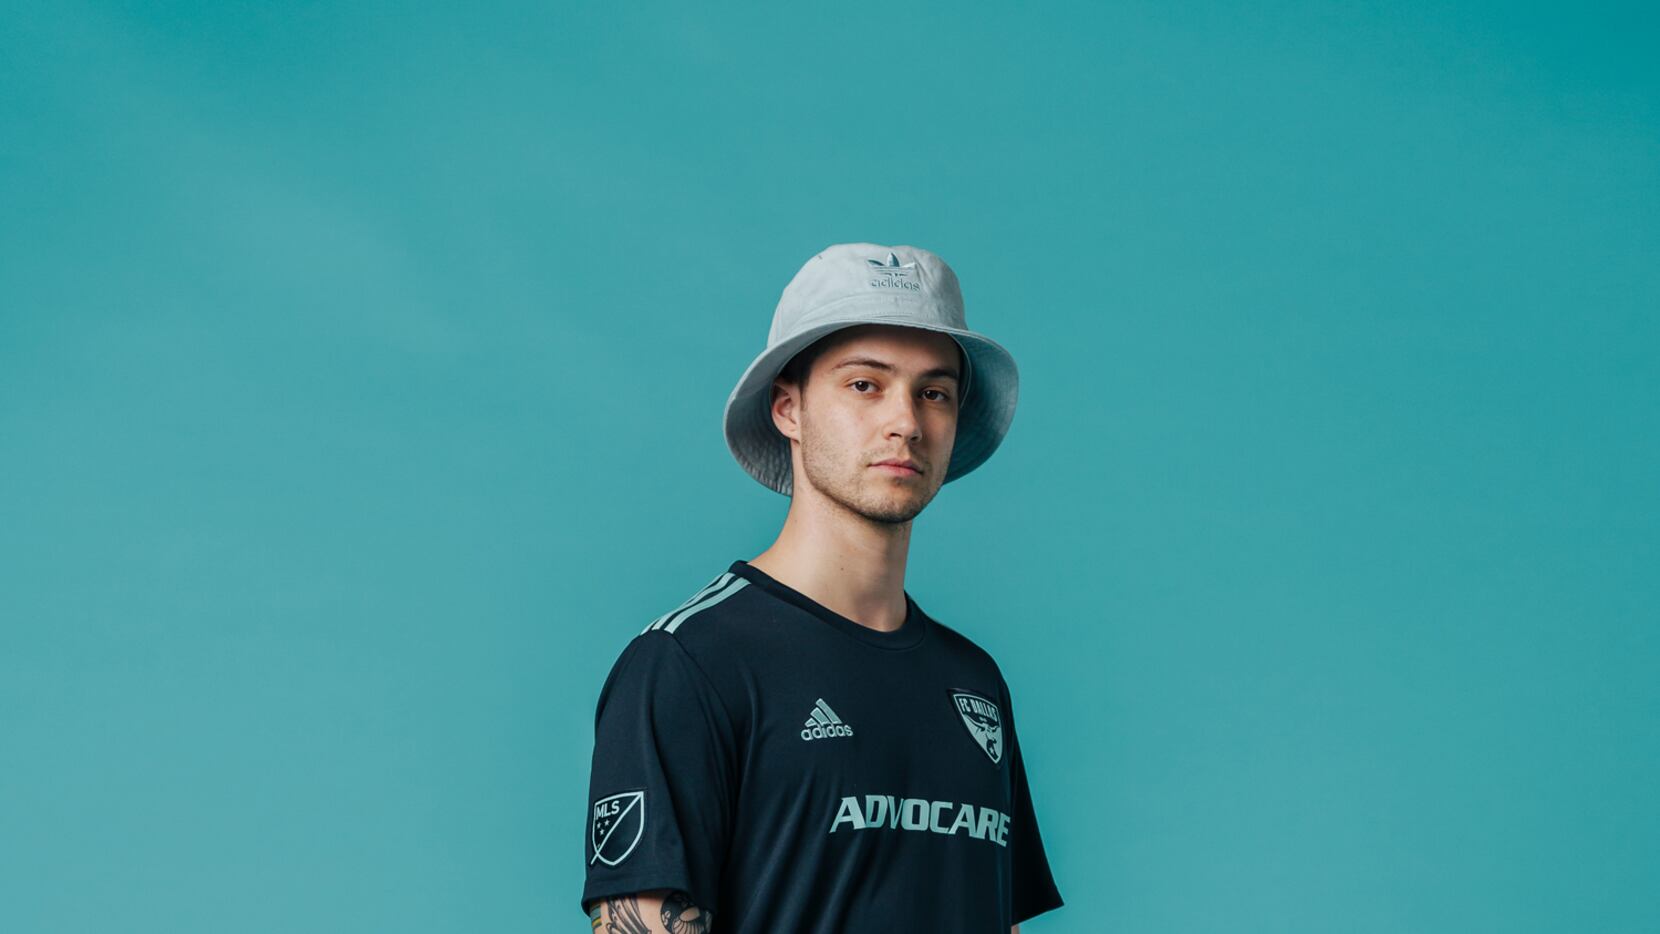 MLS Teams up with adidas, Parley for the Oceans - Soccer Stadium